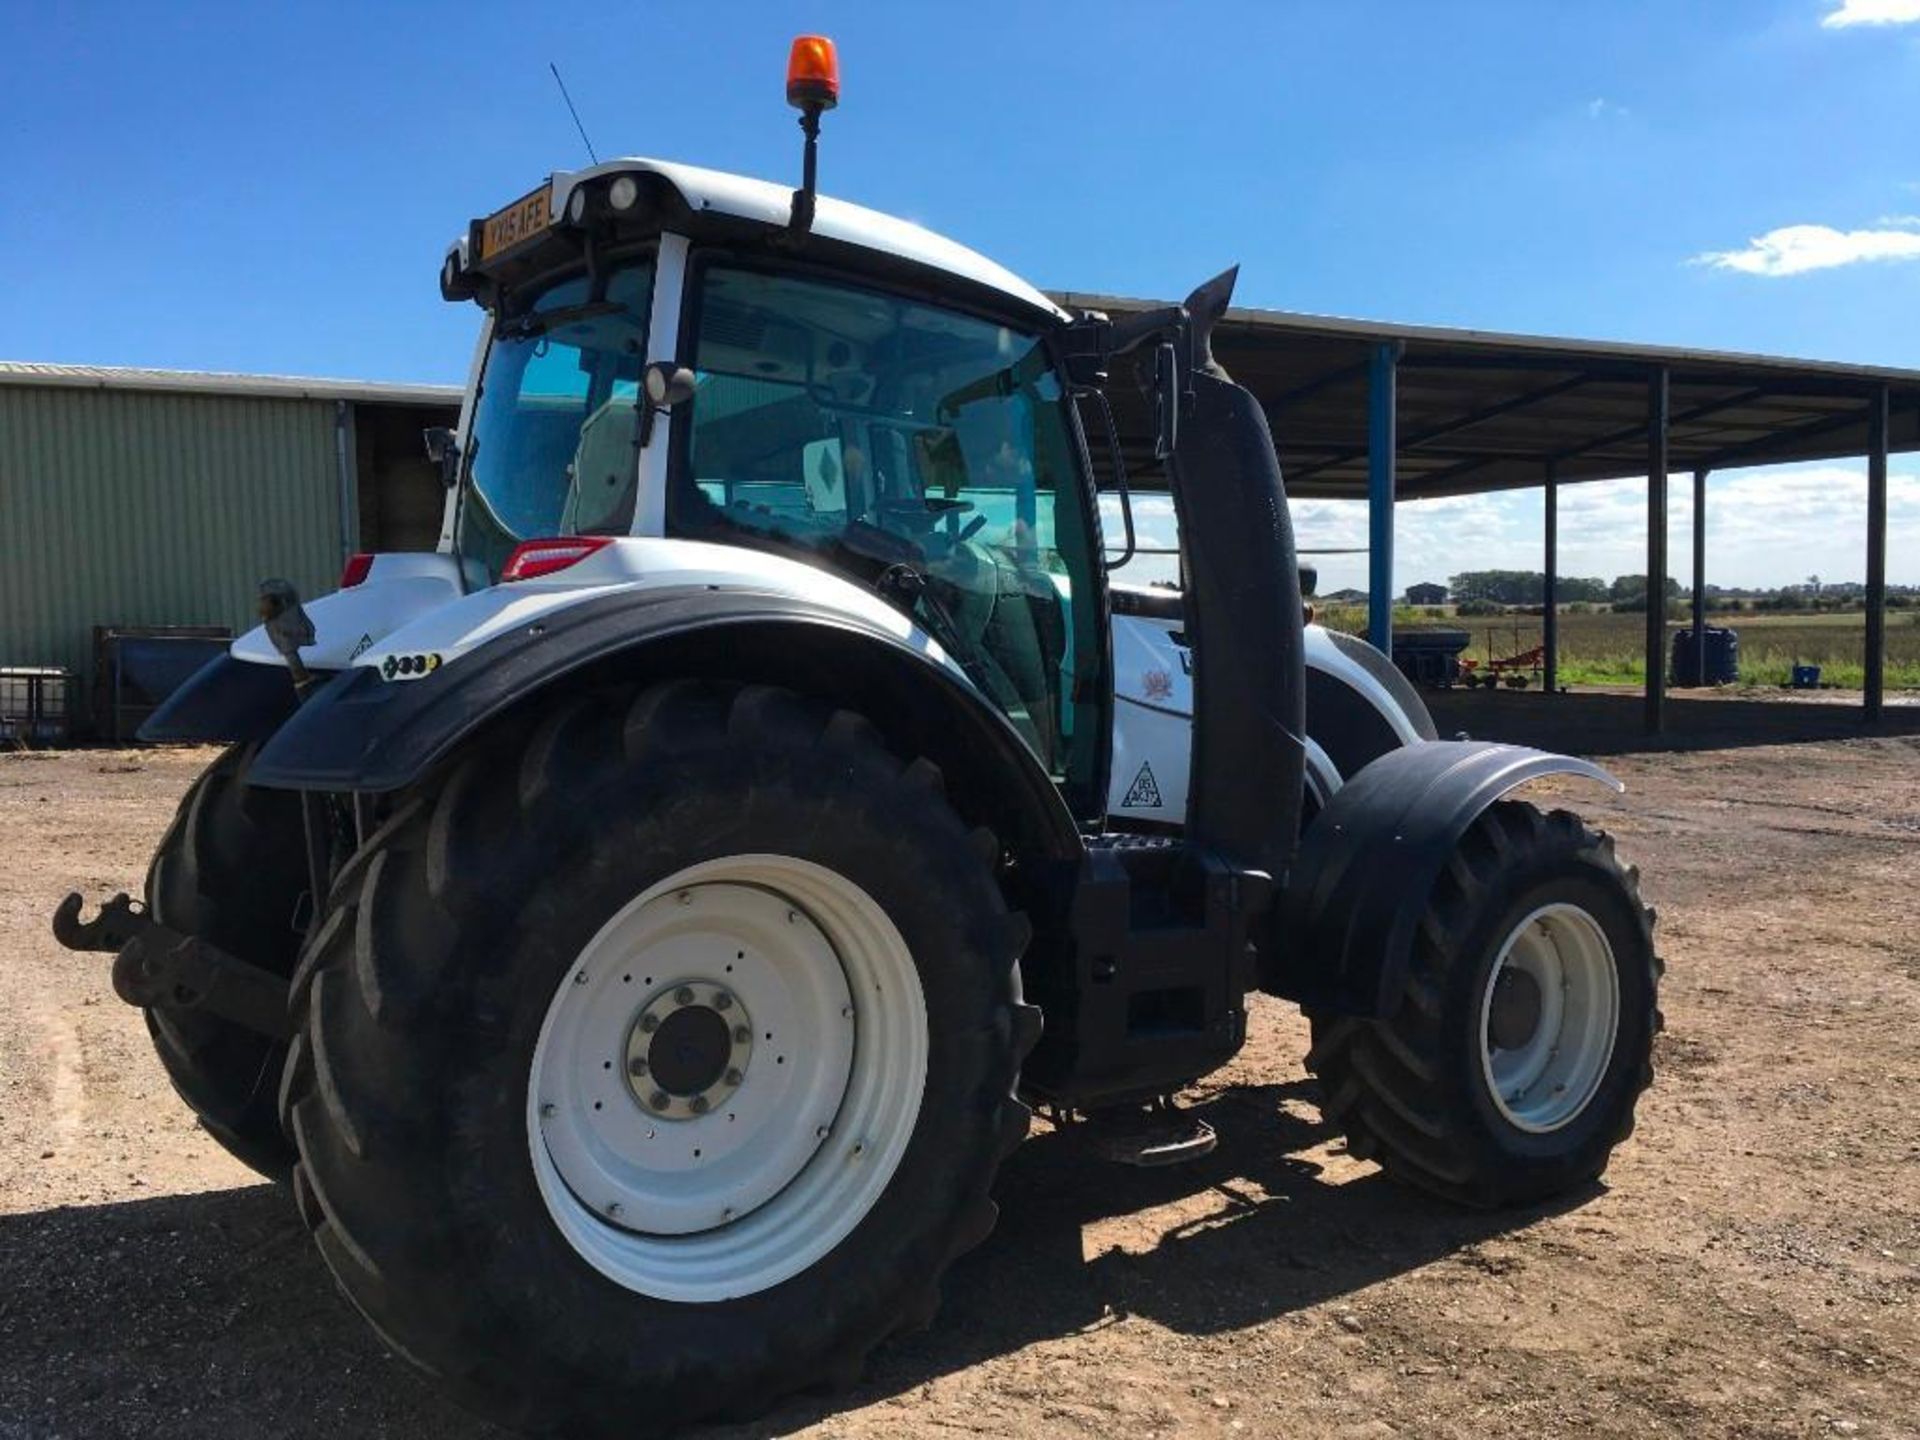 2015 Valtra T174 Versu 50kph tractor, powershift transmission, air suspension, 2 front and 4 rear sp - Image 7 of 15